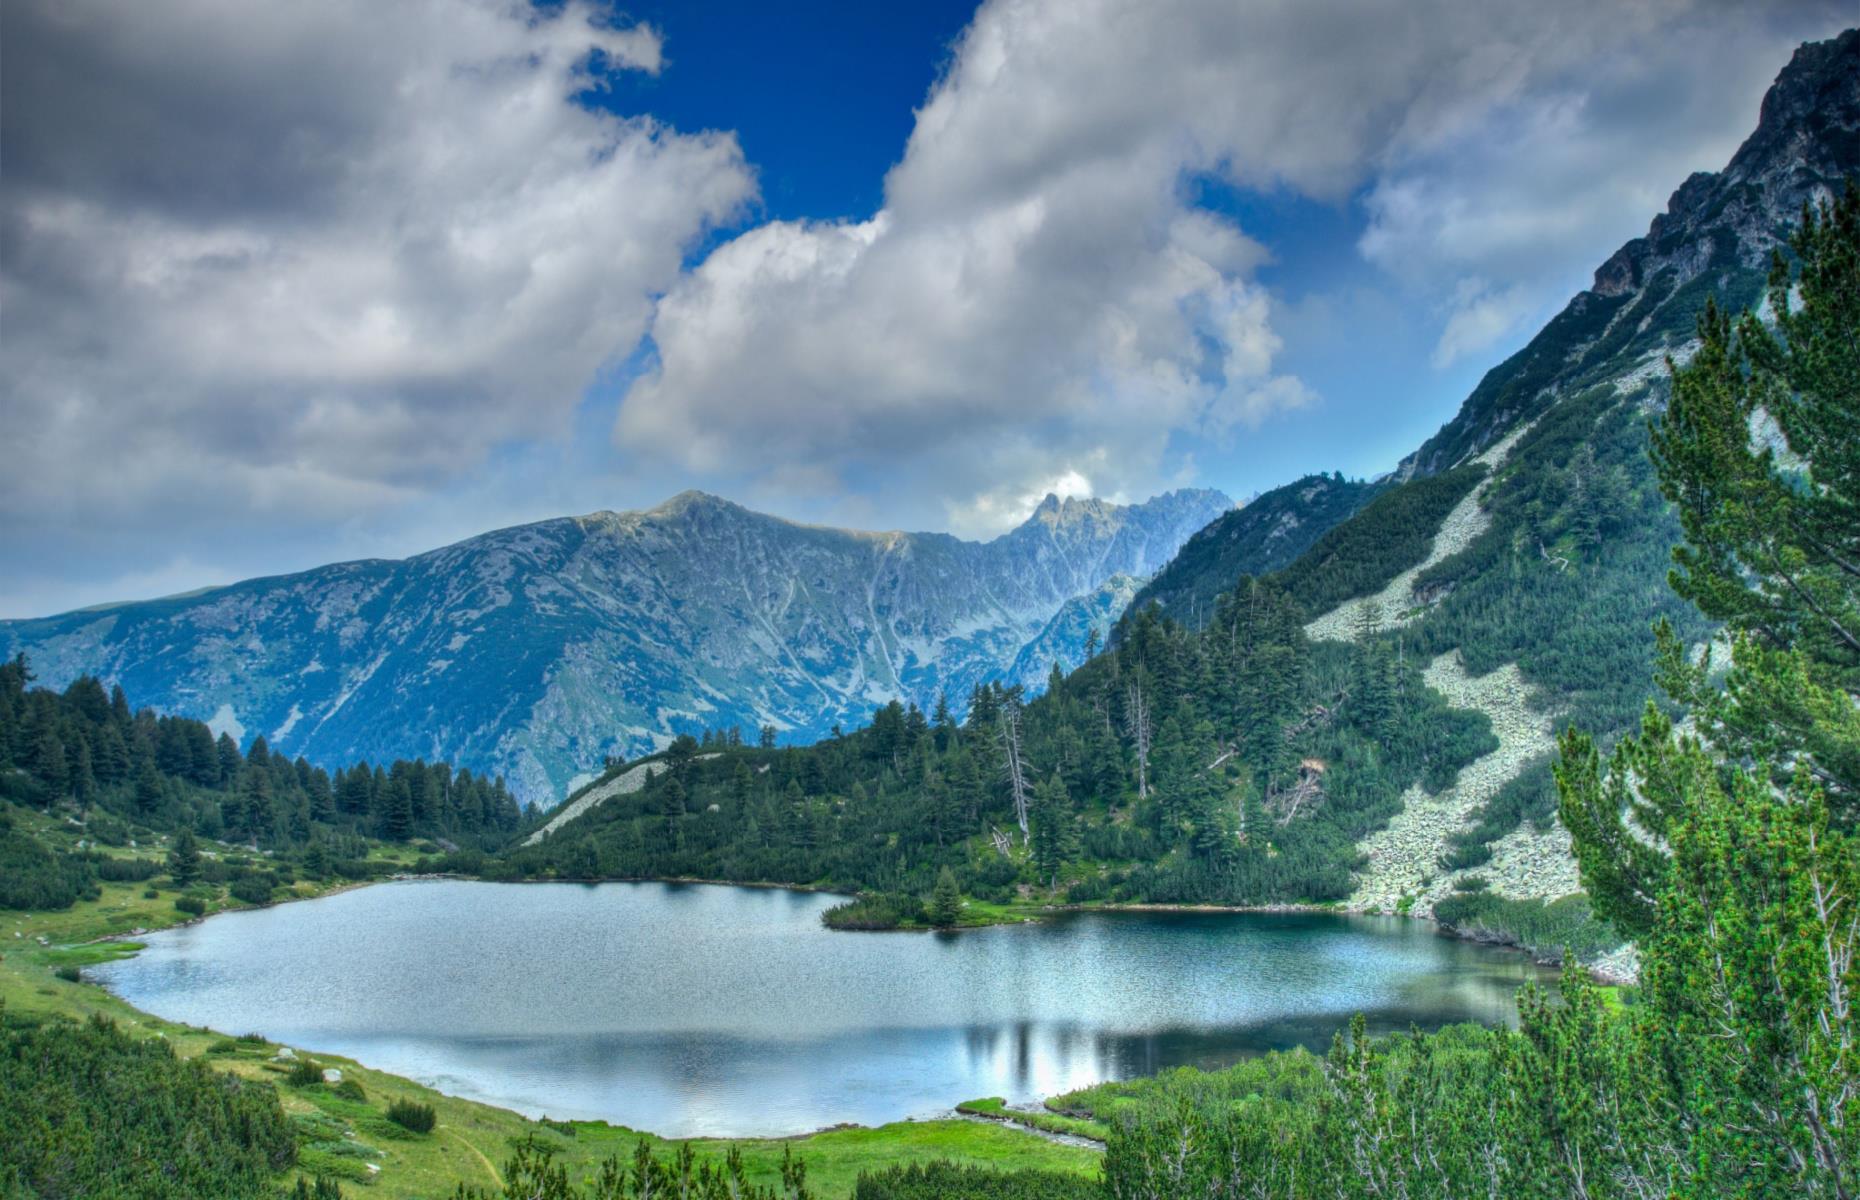 <p>Named after Bulgaria's Pirin Mountains, <a href="https://bulgariatravel.org/pirin-national-park/">this park</a> has some postcard-perfect mountains and protected coniferous forests, but its claim to fame is the 100-or-so glacial lakes that sit within its boundaries. Outdoor enthusiasts flock to the park year-round, exploring by foot or bike in the summer, with opportunities to ski and snowshoe once snow hits the ground.</p>